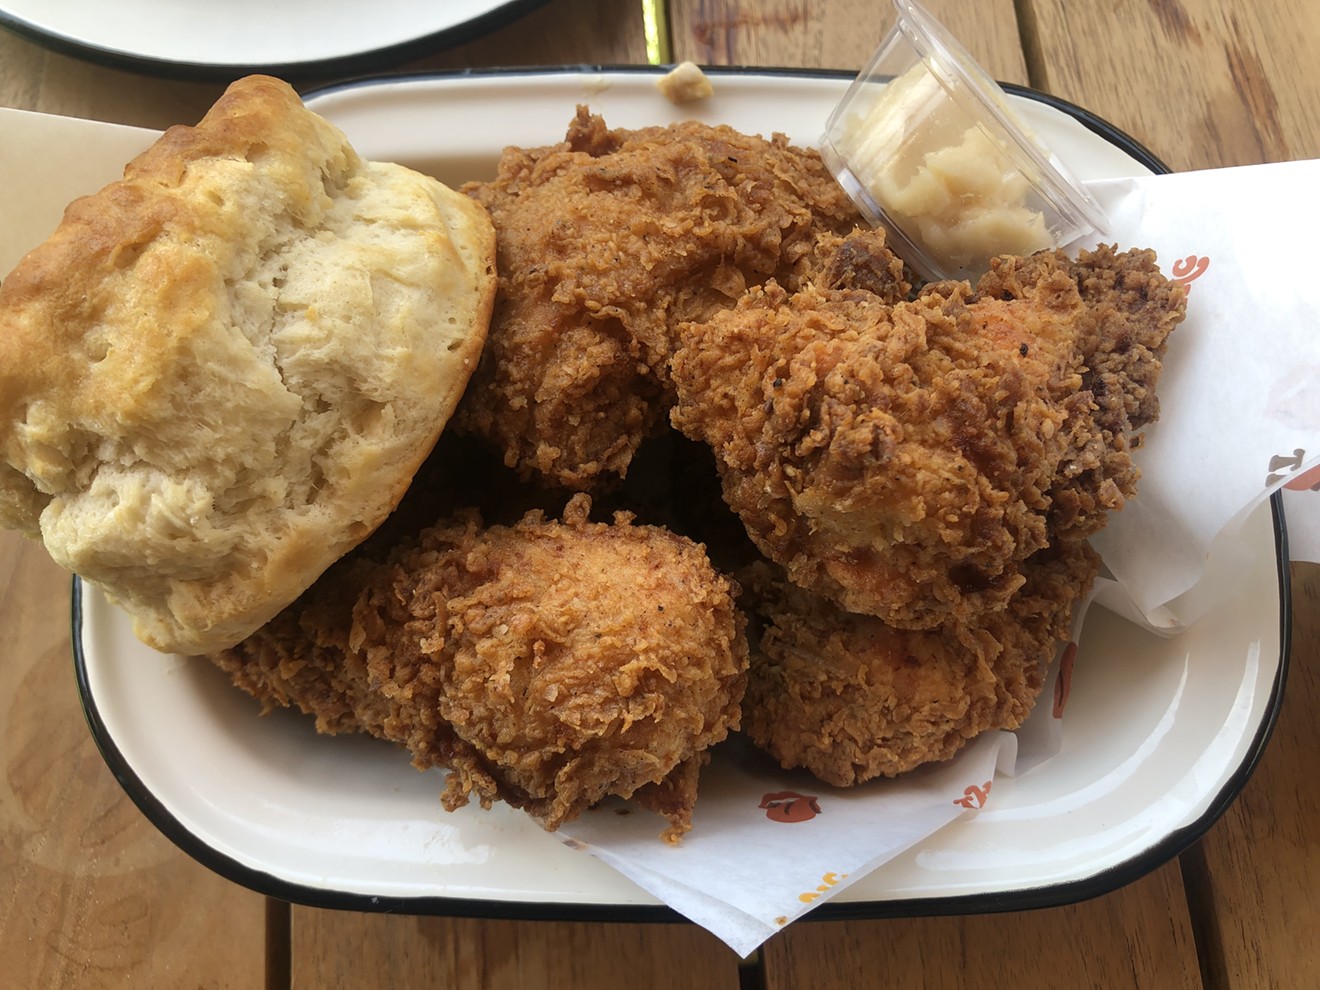 A full order of Nashville-style hot chicken from The Hot Chick